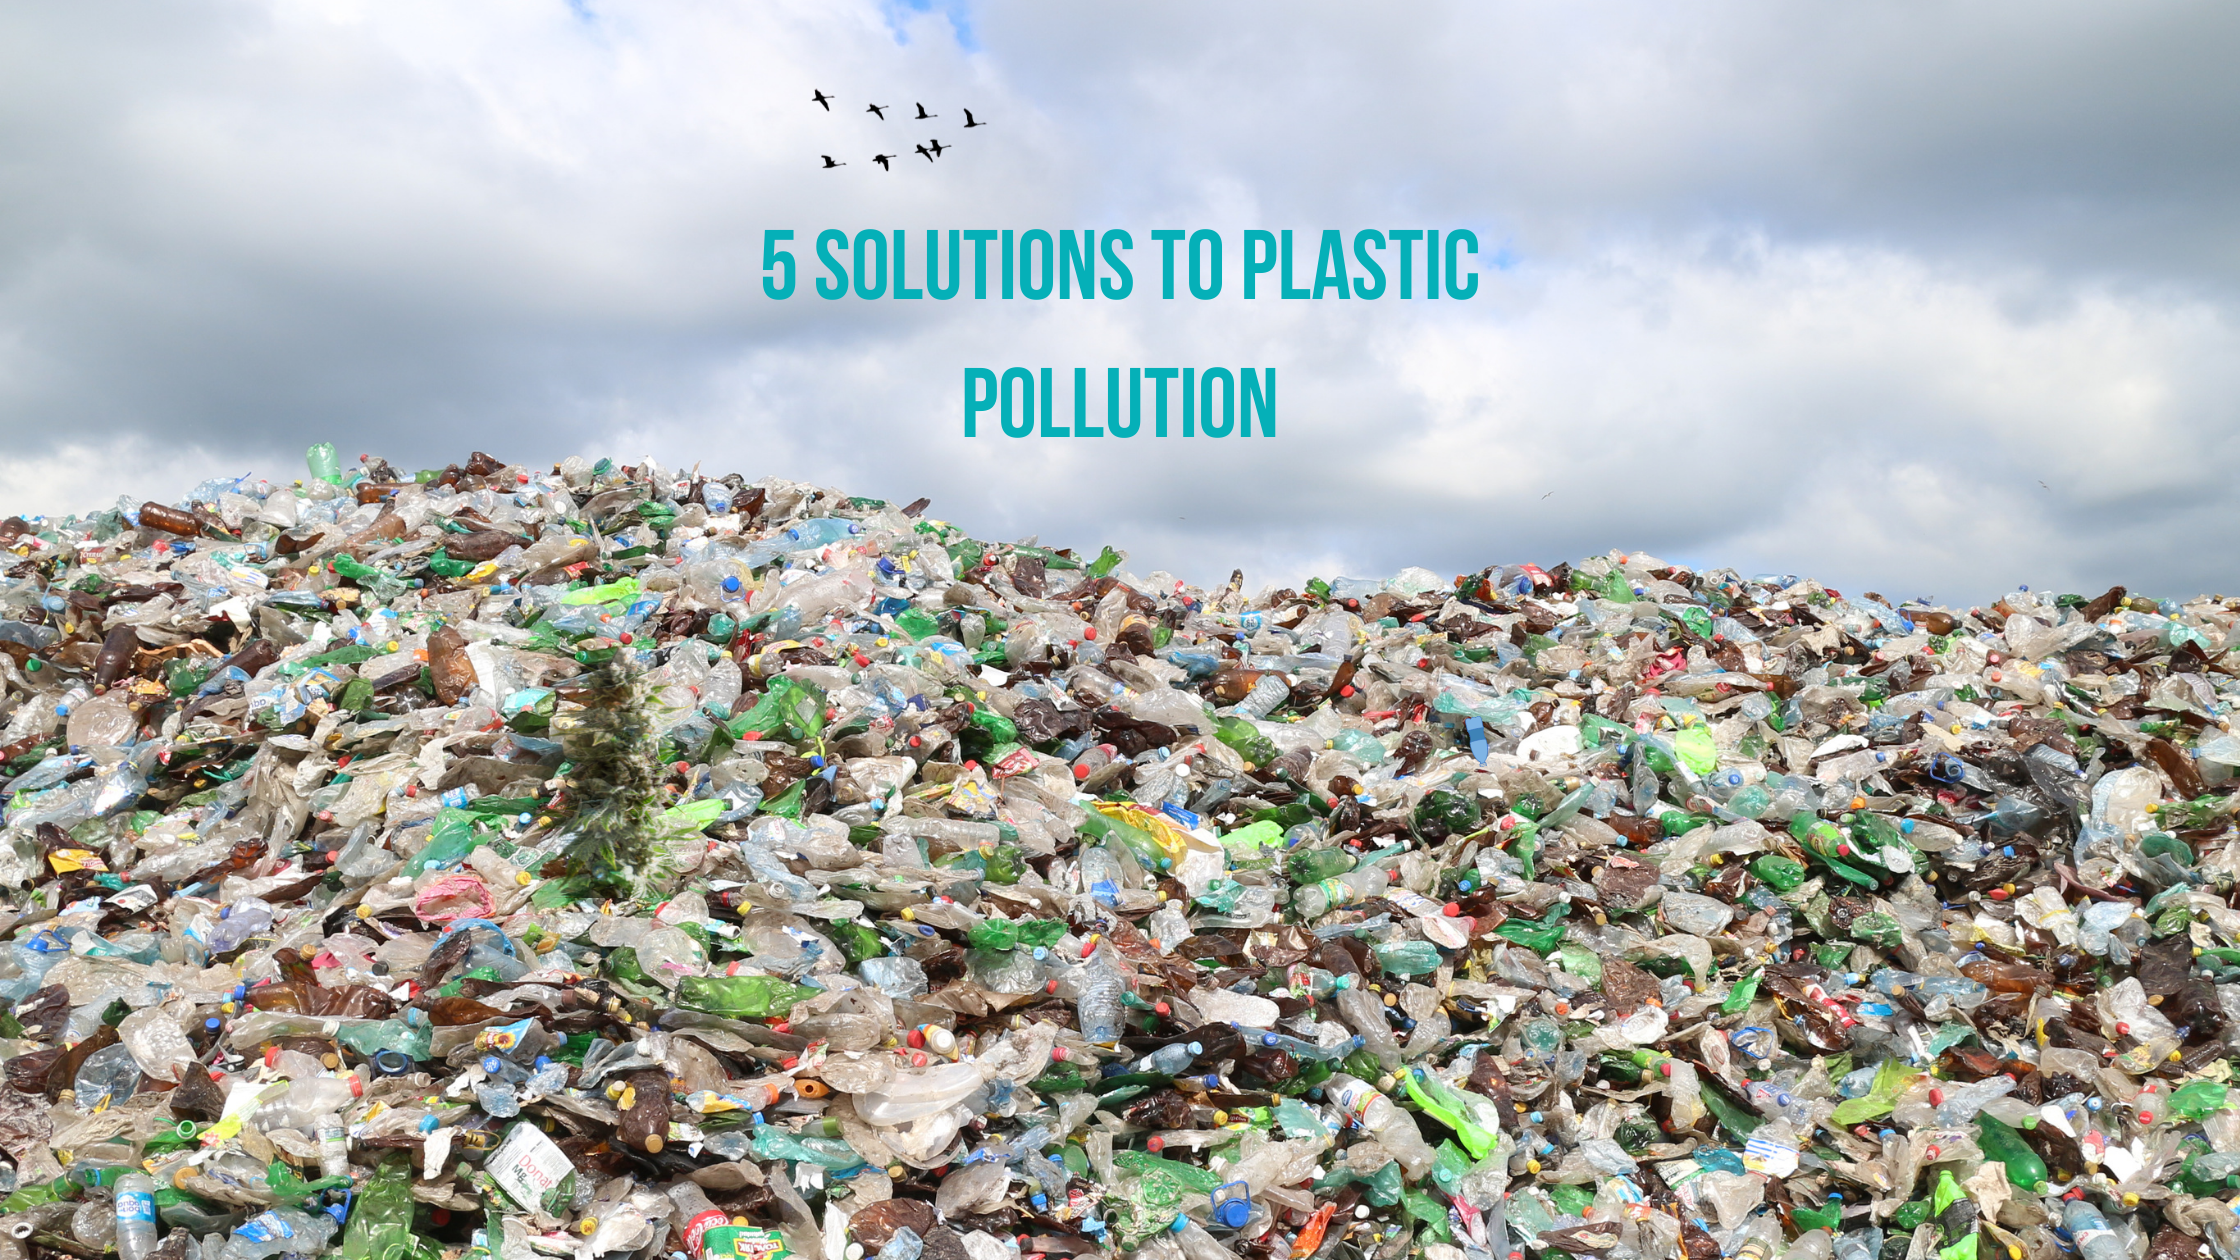 Banner displaying a text with 5 solutions to plastic pollution written above a pile a plastic waste.